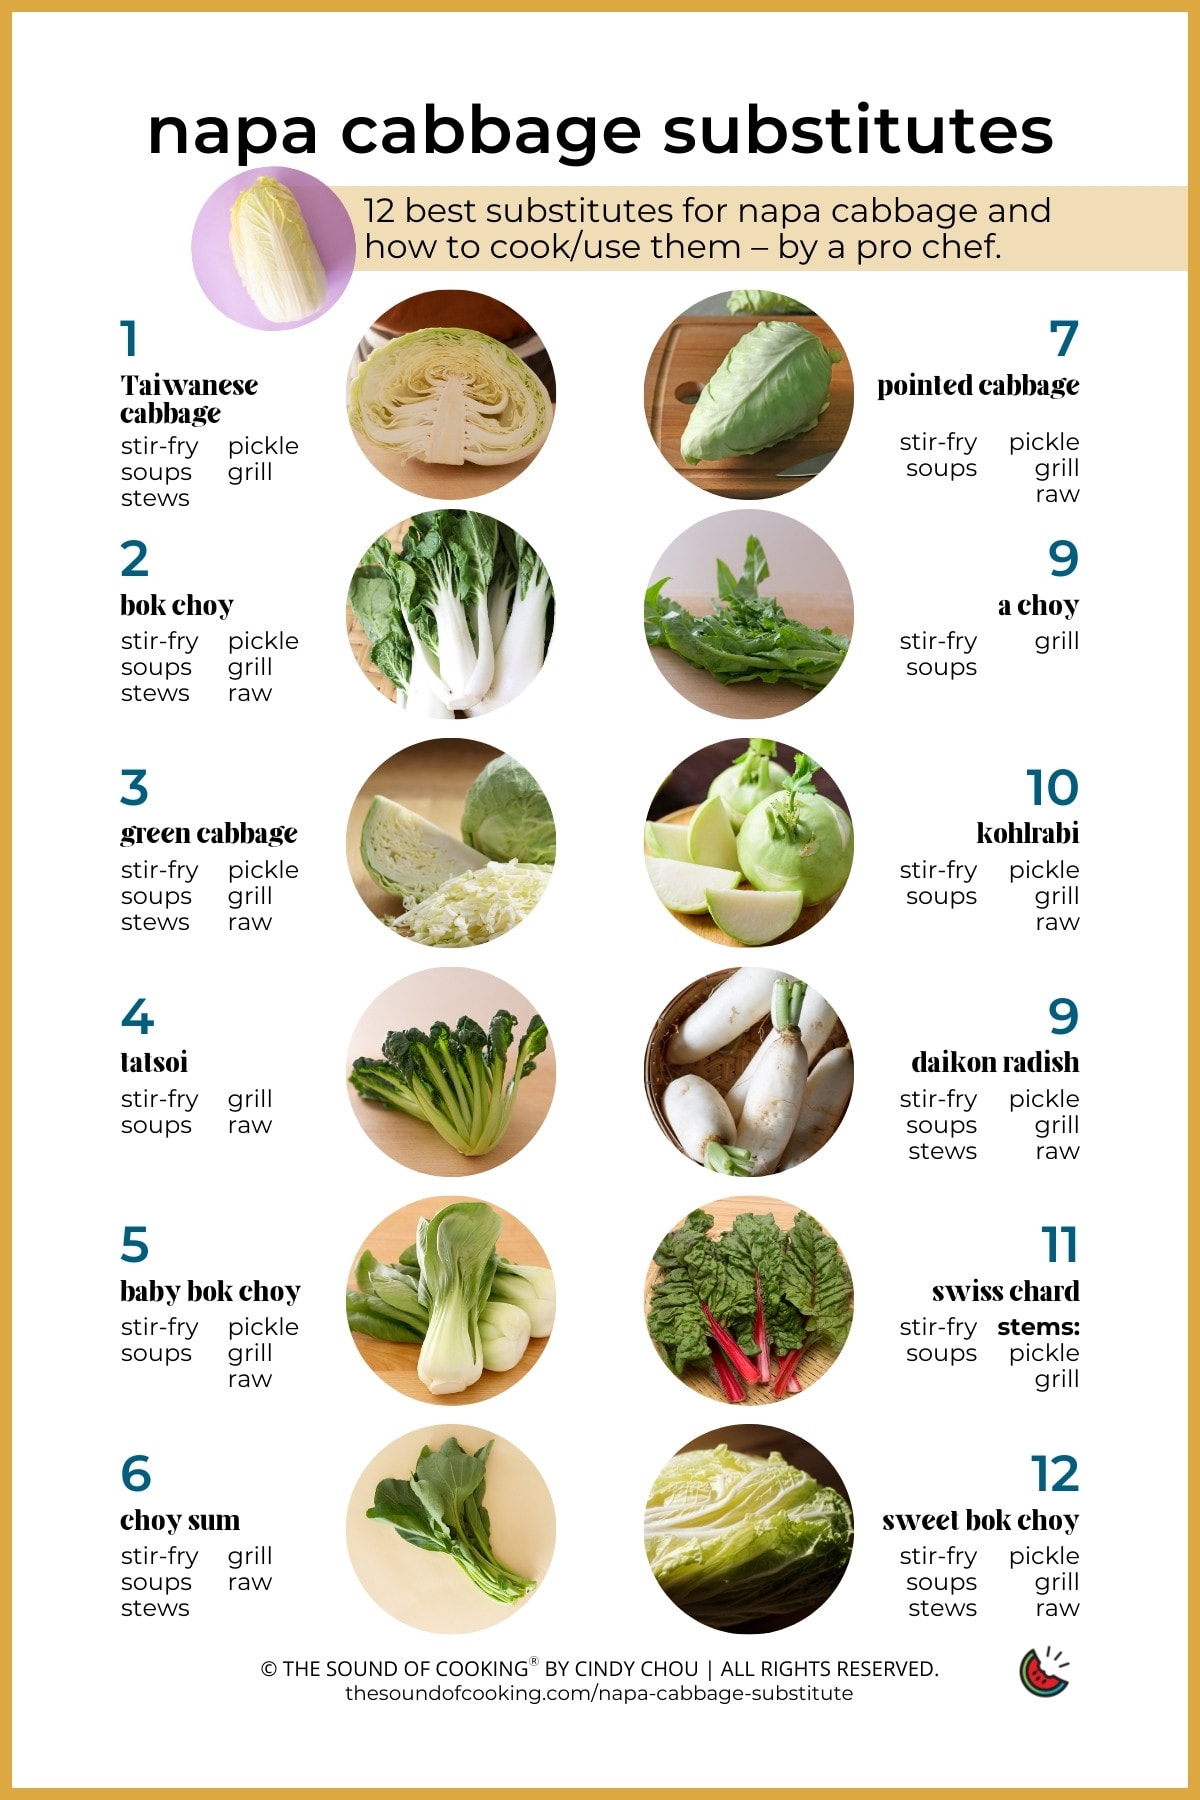 Two columns of the 12 napa cabbage substitutes mentioned in this article with their corresponding photos, vegetable names, and a list of how to cook or use them (such as stir-fry, soups, stews, pickle, grill, or raw).